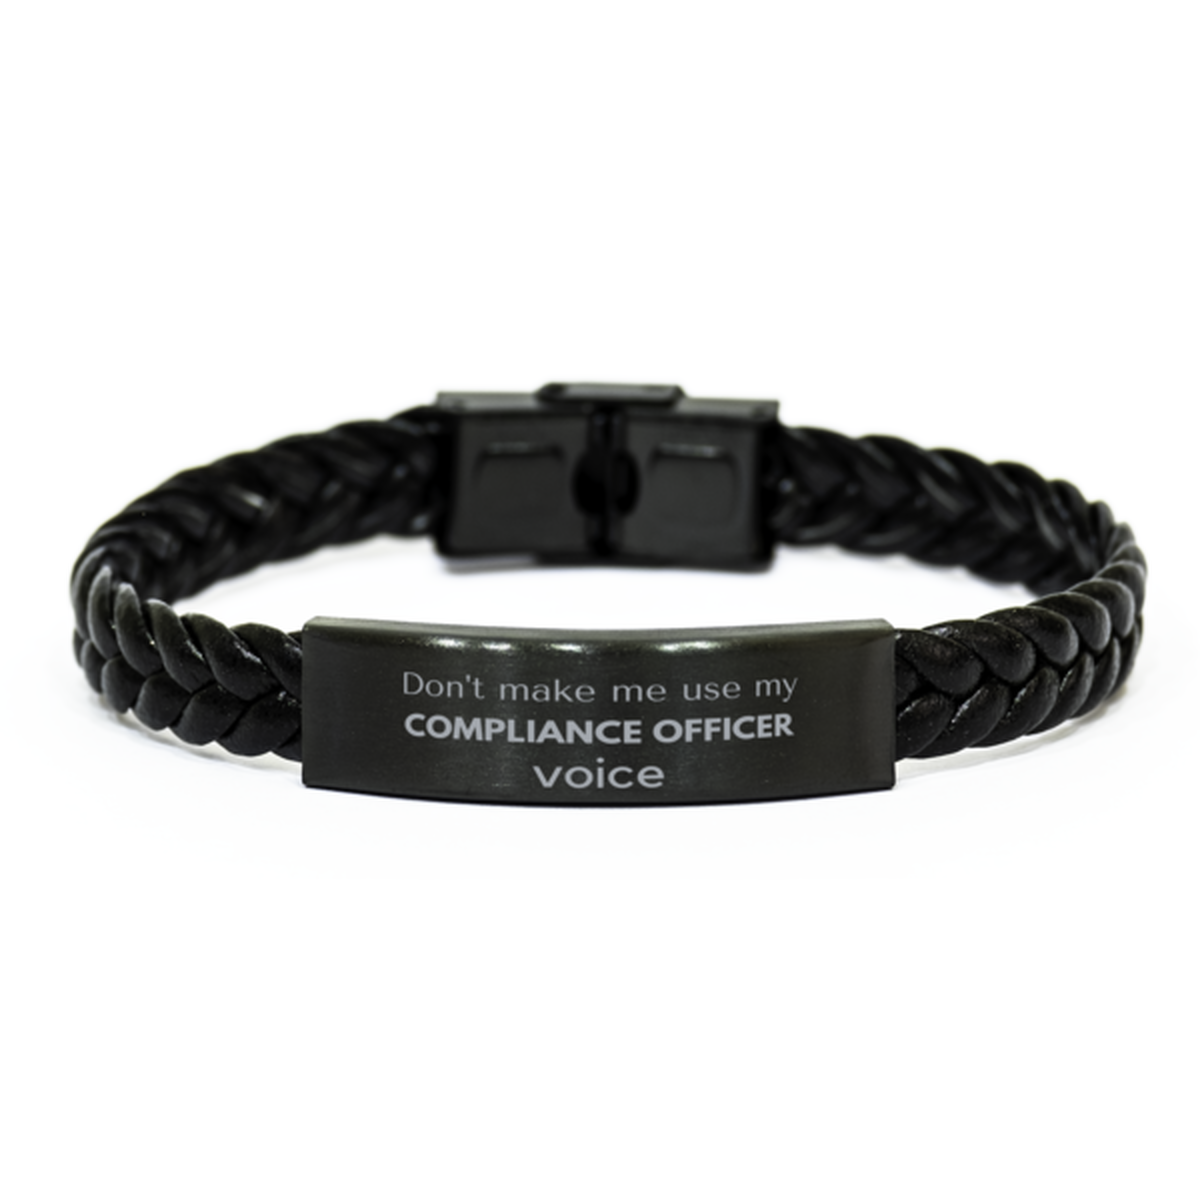 Don't make me use my Compliance Officer voice, Sarcasm Compliance Officer Gifts, Christmas Compliance Officer Braided Leather Bracelet Birthday Unique Gifts For Compliance Officer Coworkers, Men, Women, Colleague, Friends